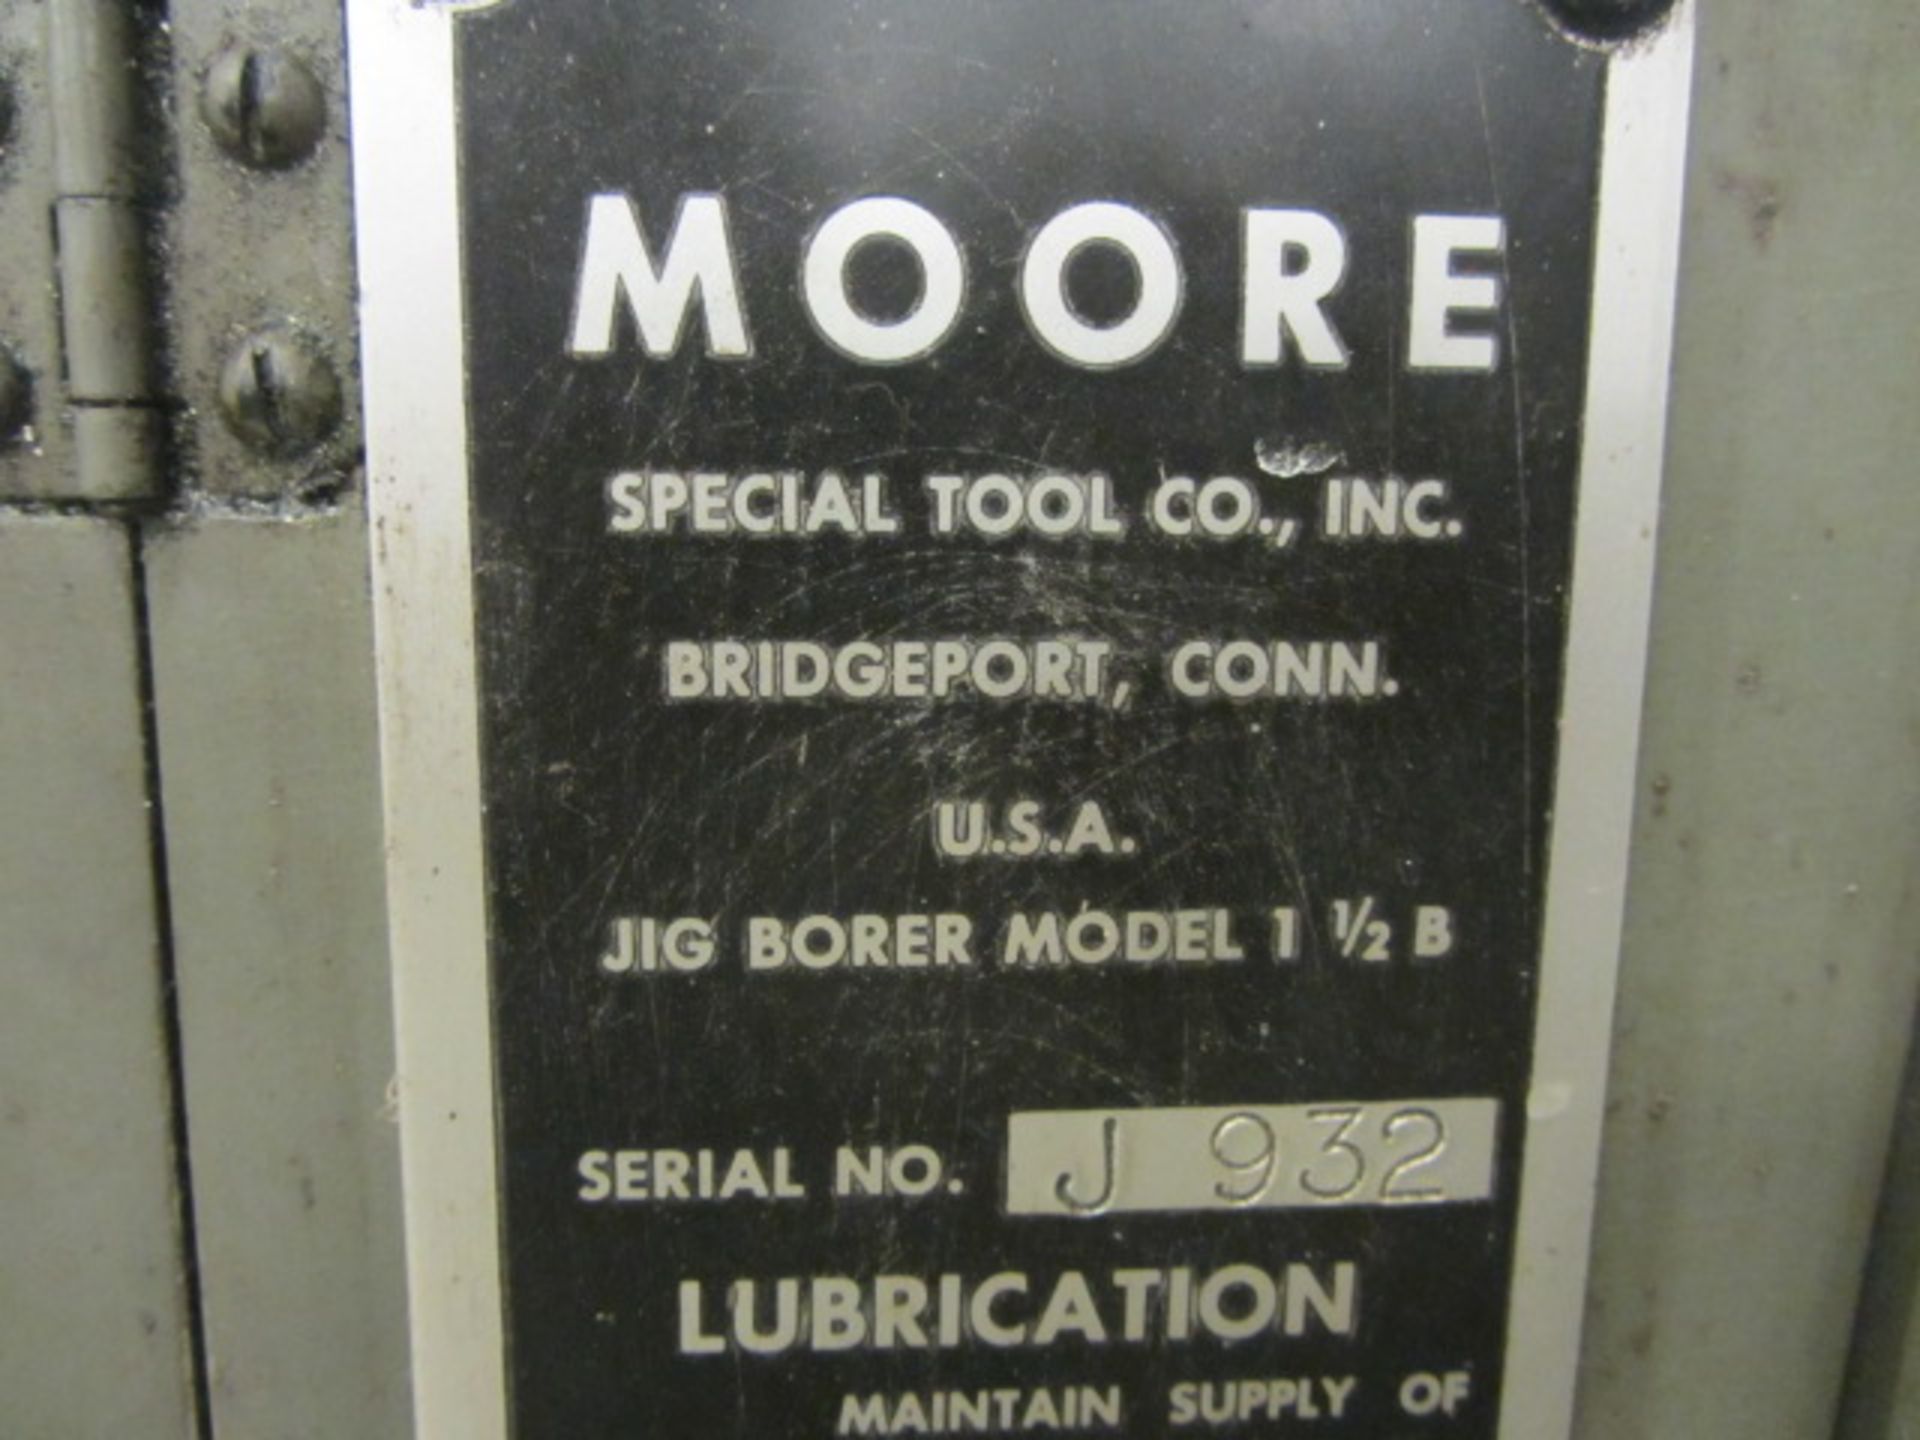 Moore 1-1/2B Jig Borer with 9'' x 14'' Travels, Adjustable Feed, Indicator, sn:J932 - Image 4 of 5